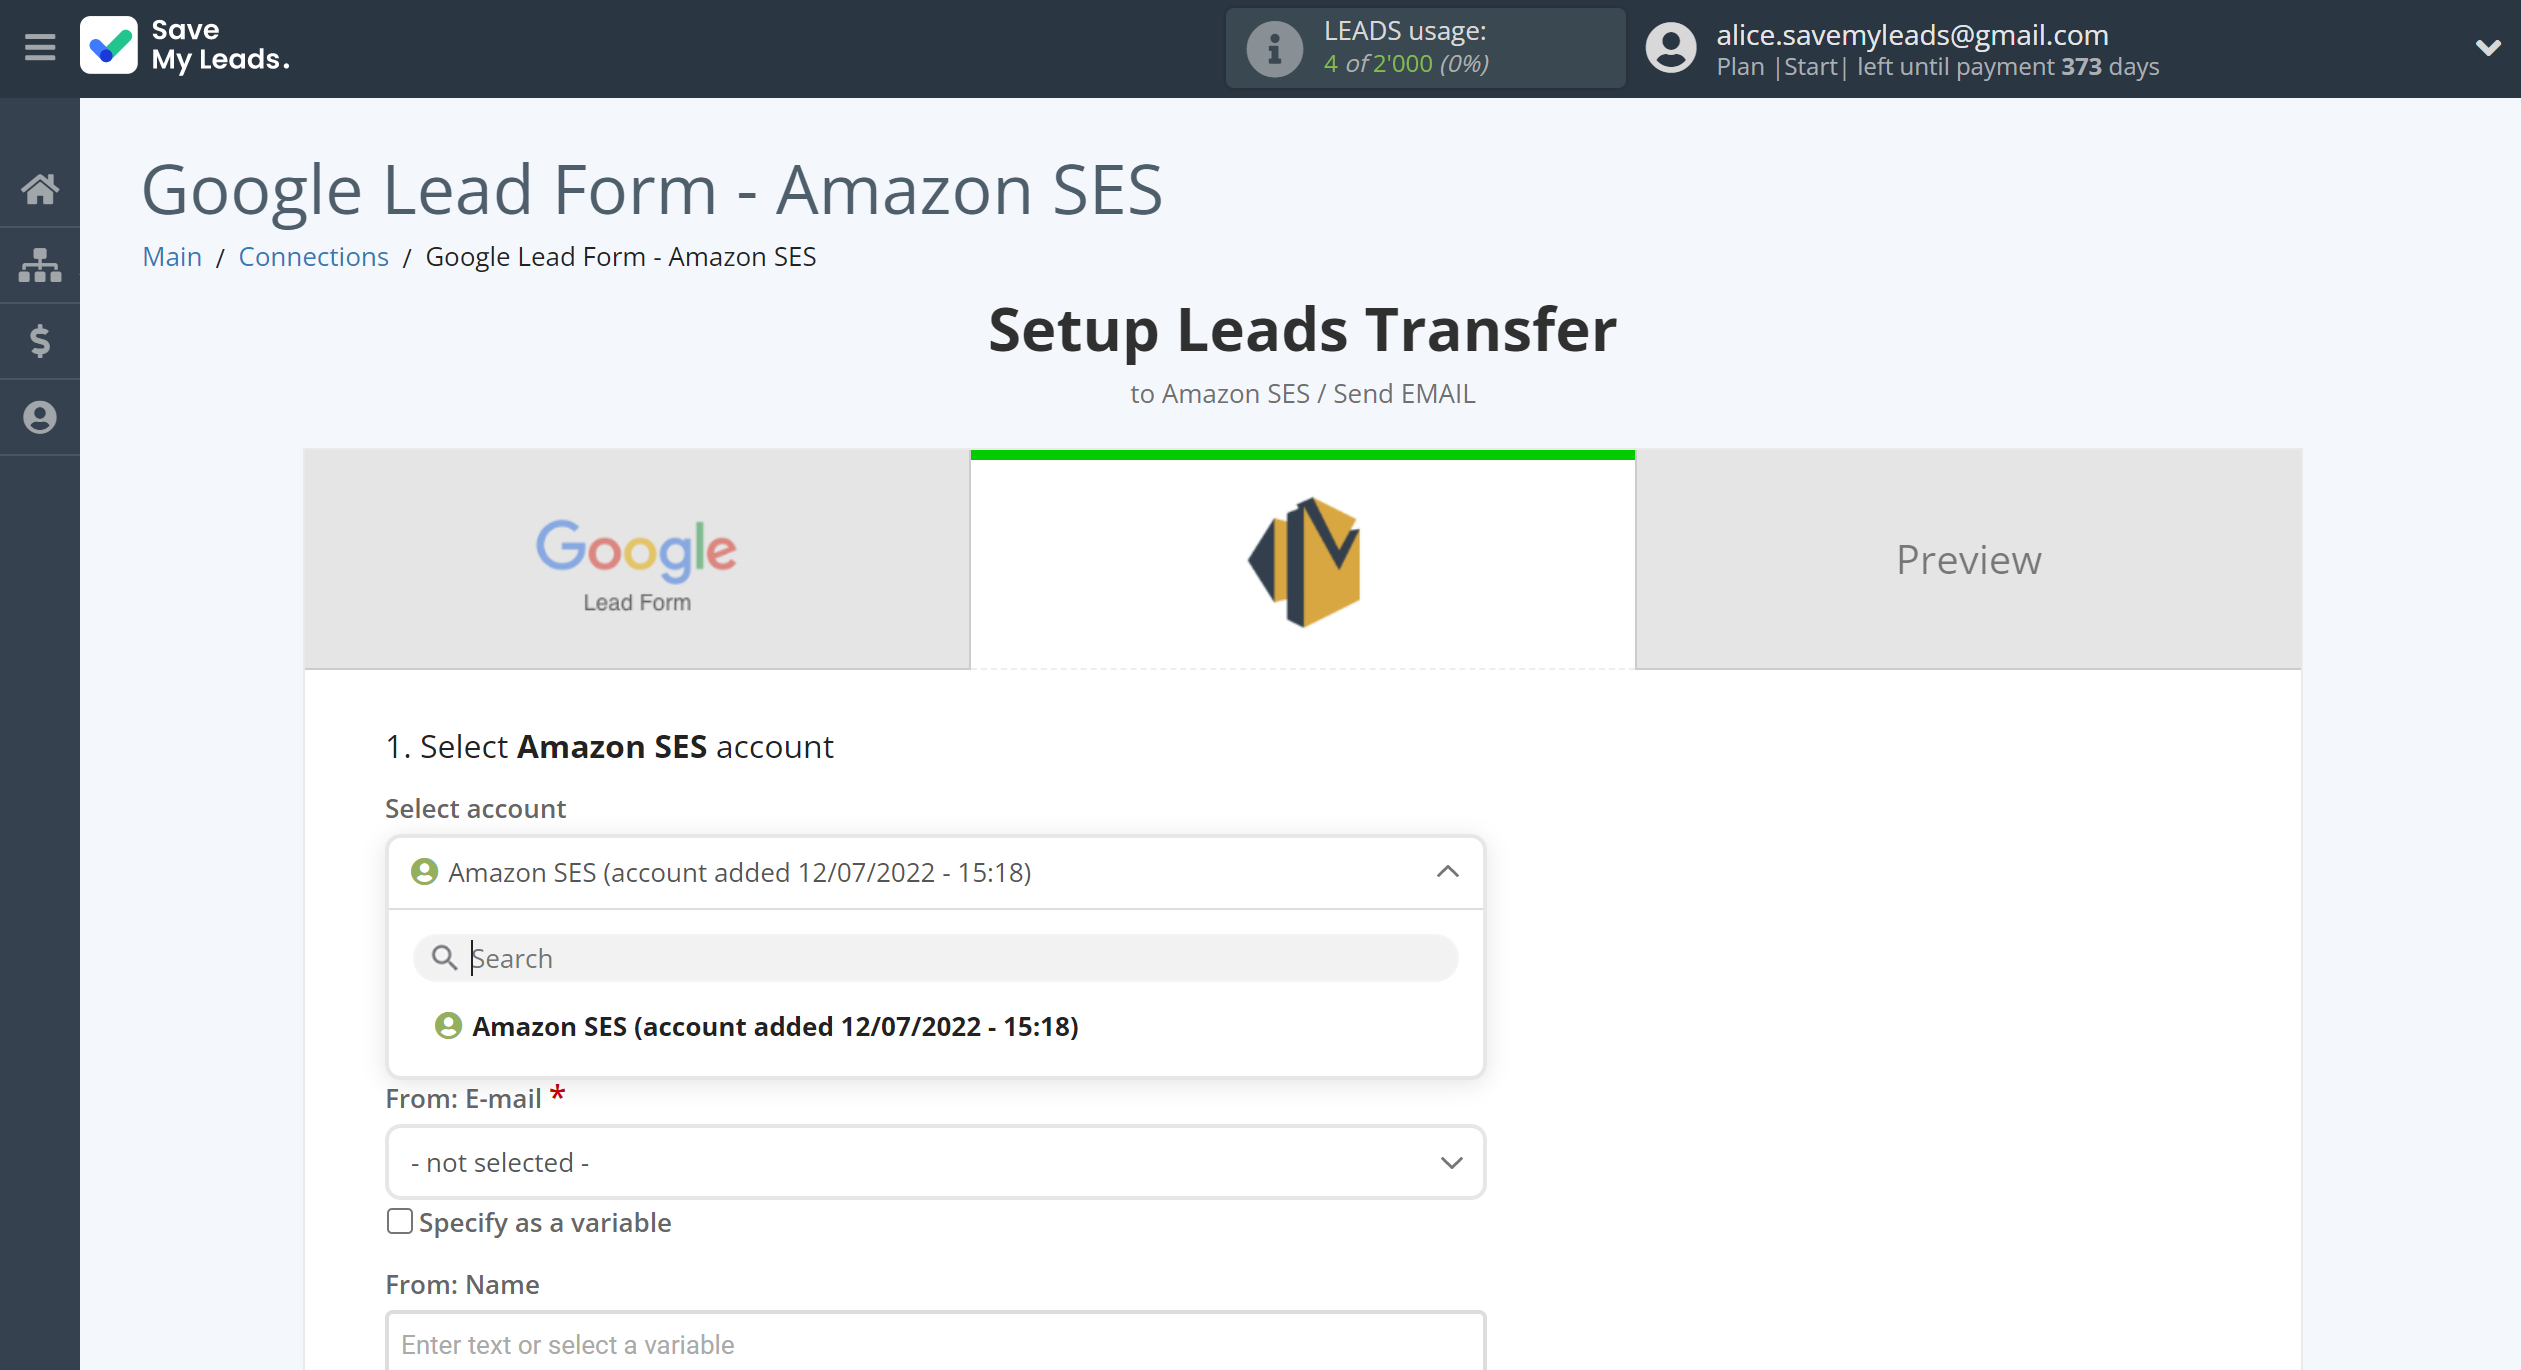 How to Connect Google Lead Form with Amazon SES | Data Destination account selection